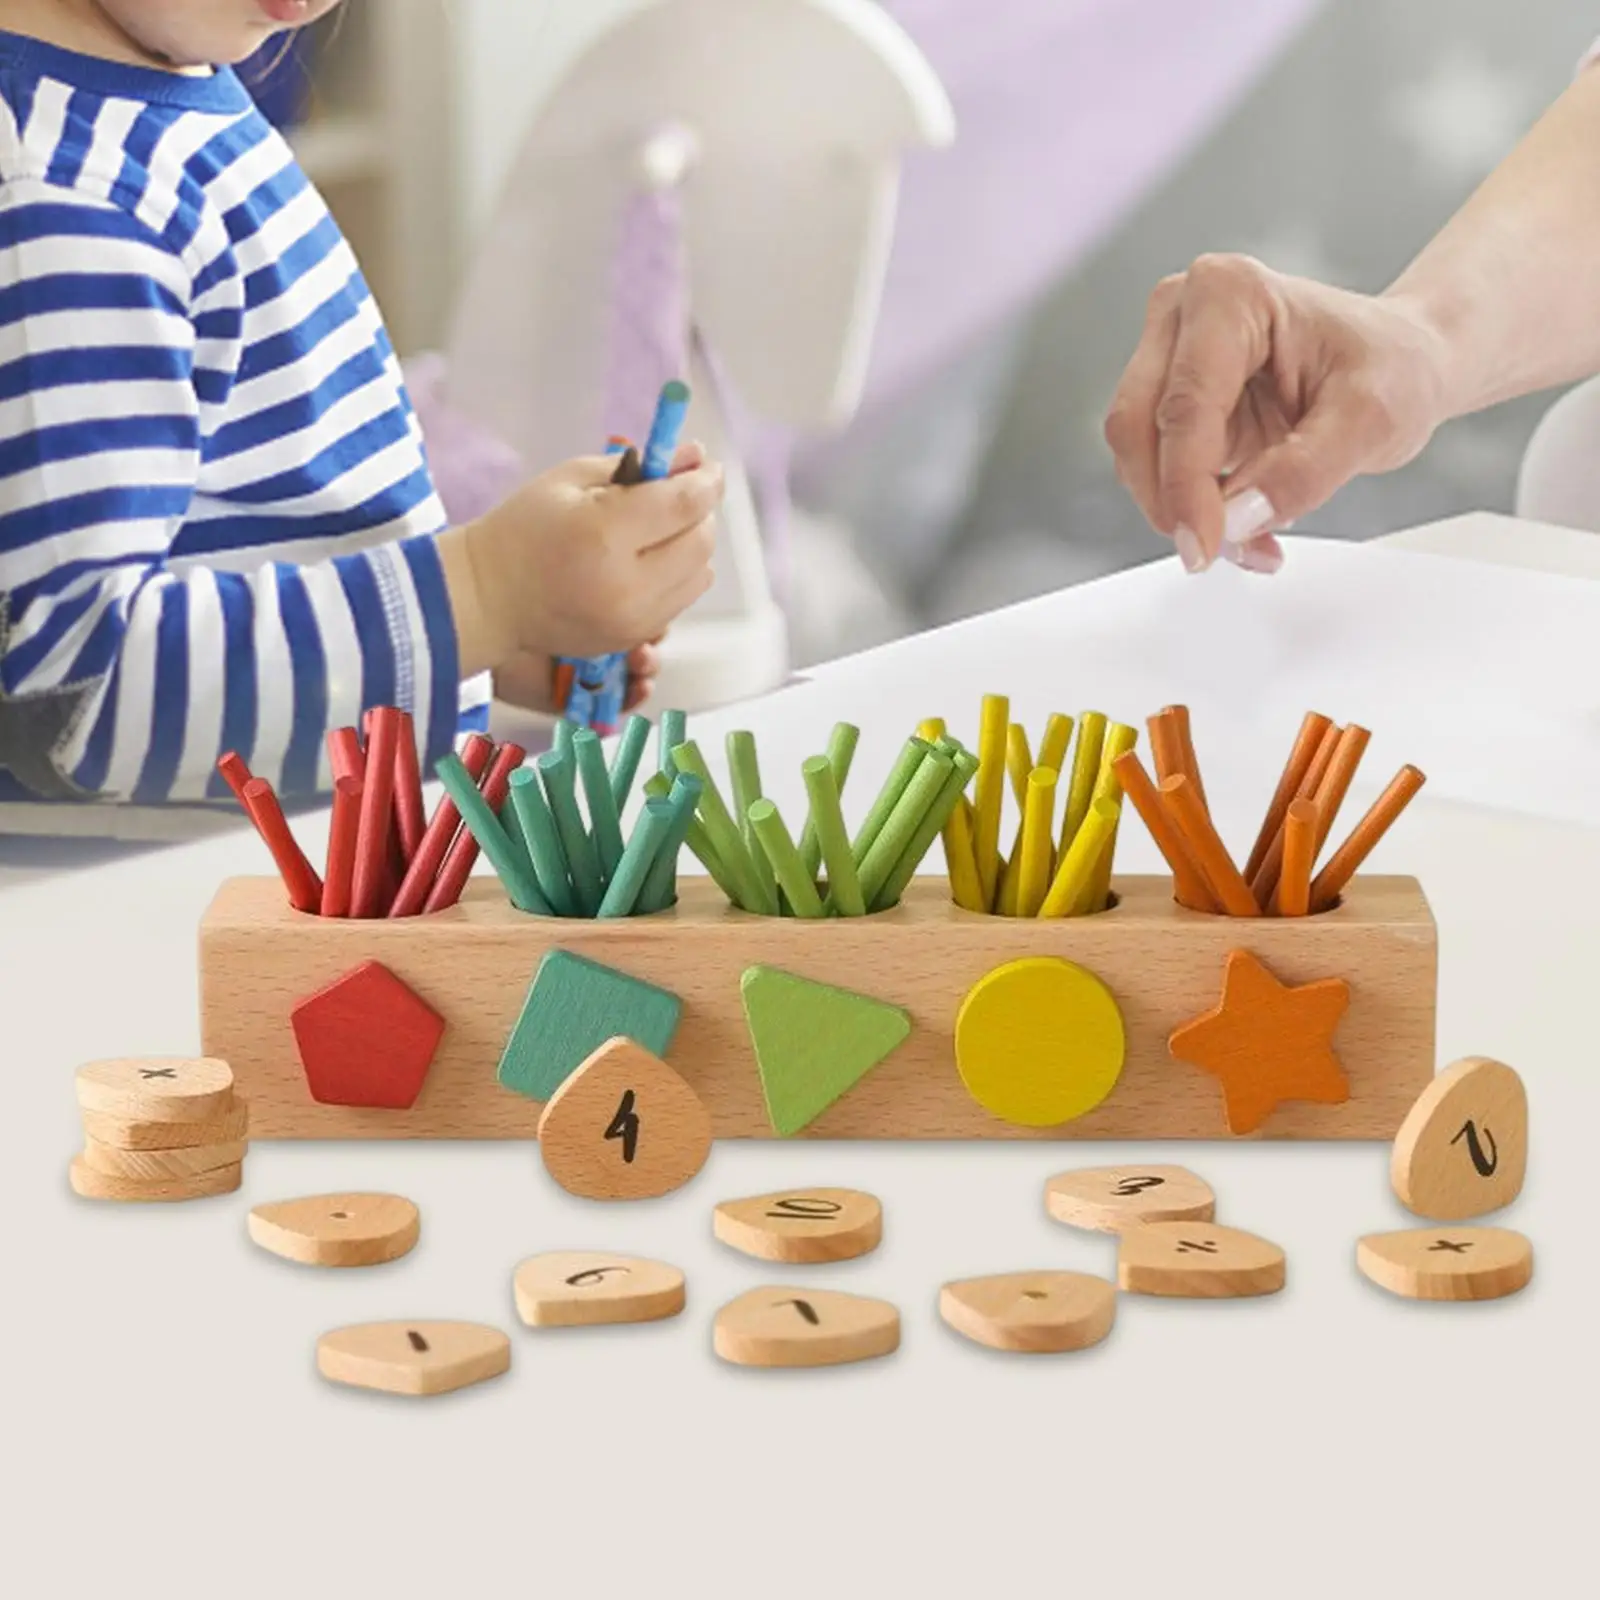 Counting Rod Playset Gifts Multipurpose Math Toys for Preschool Holiday Kindergarten Party